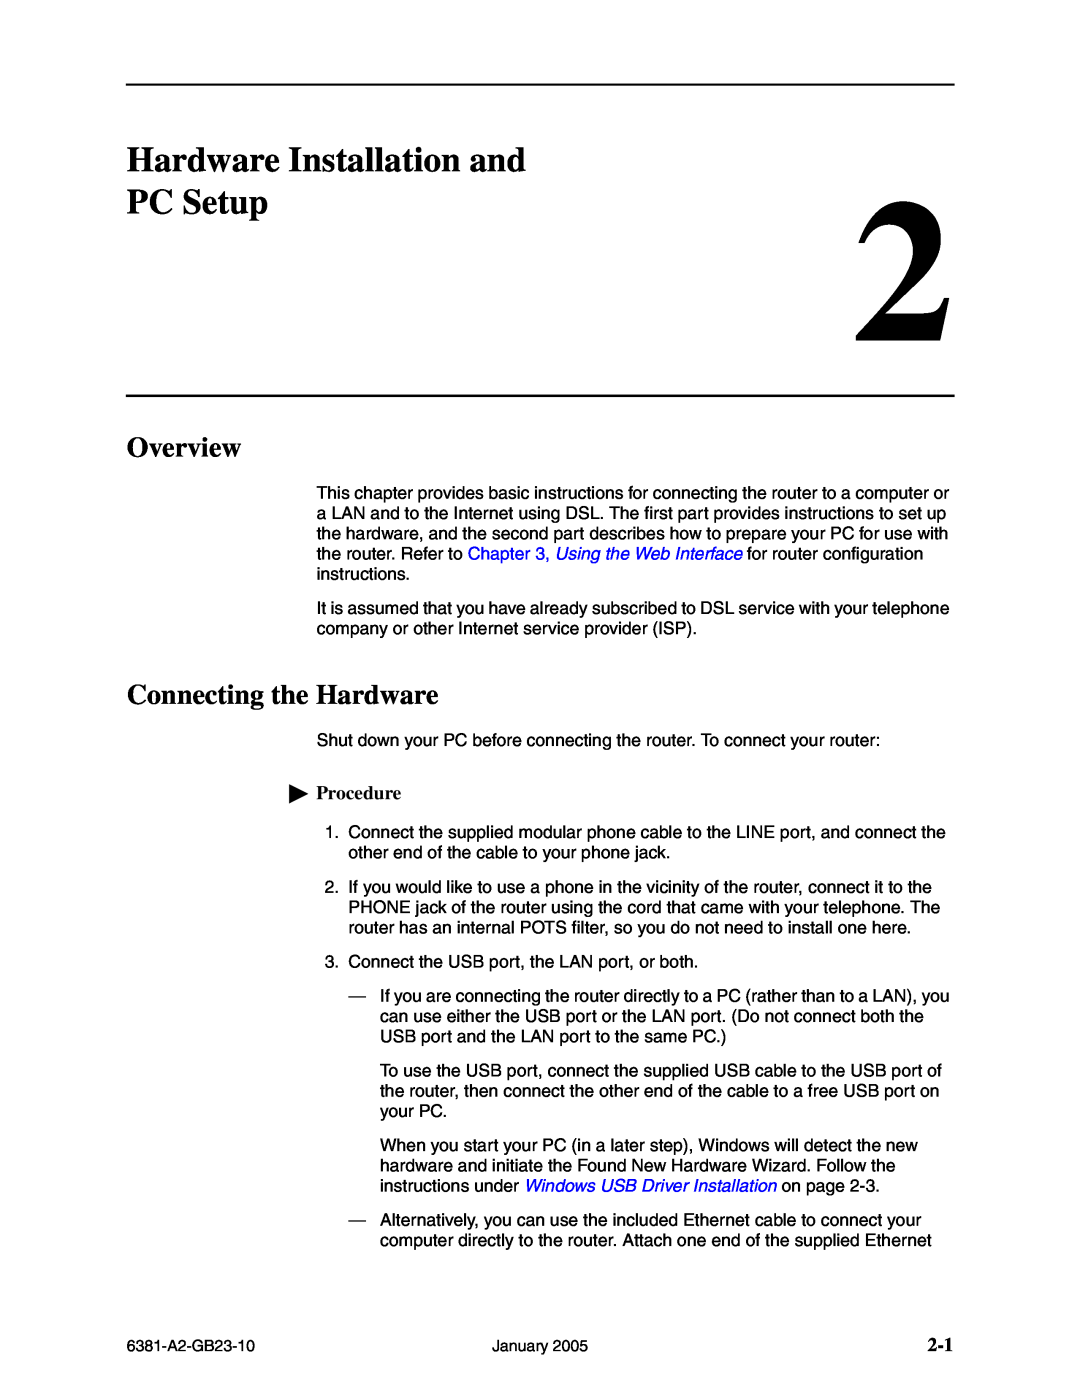 Paradyne 6381-A3 manual Hardware Installation and, PC Setup, Overview, Connecting the Hardware, Procedure 